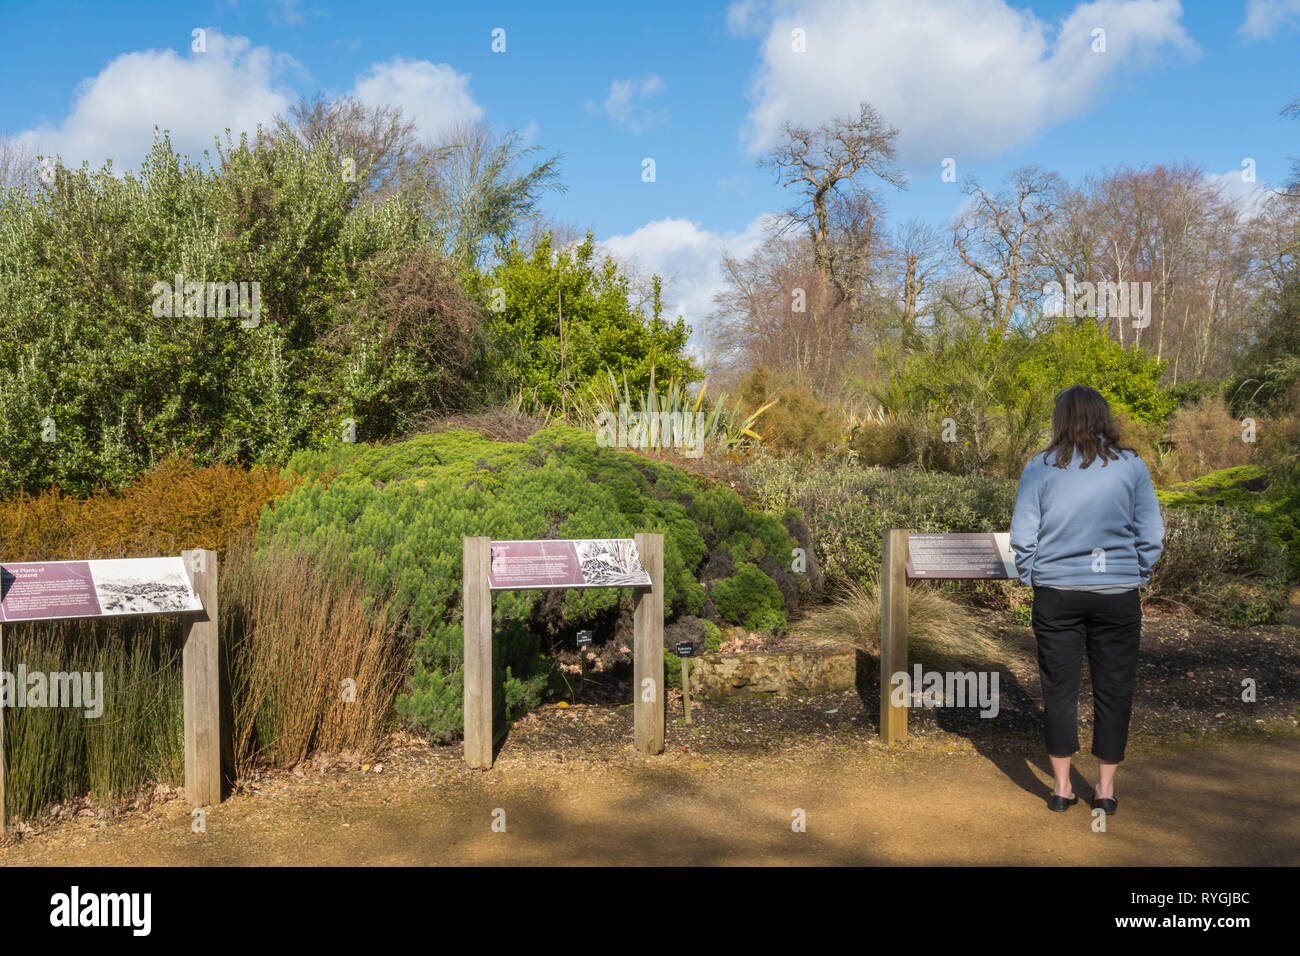 Visitor looking at information boards in the New Zealand garden area of Savill Garden on the Surrey/Berkshire border, UK Stock Photo